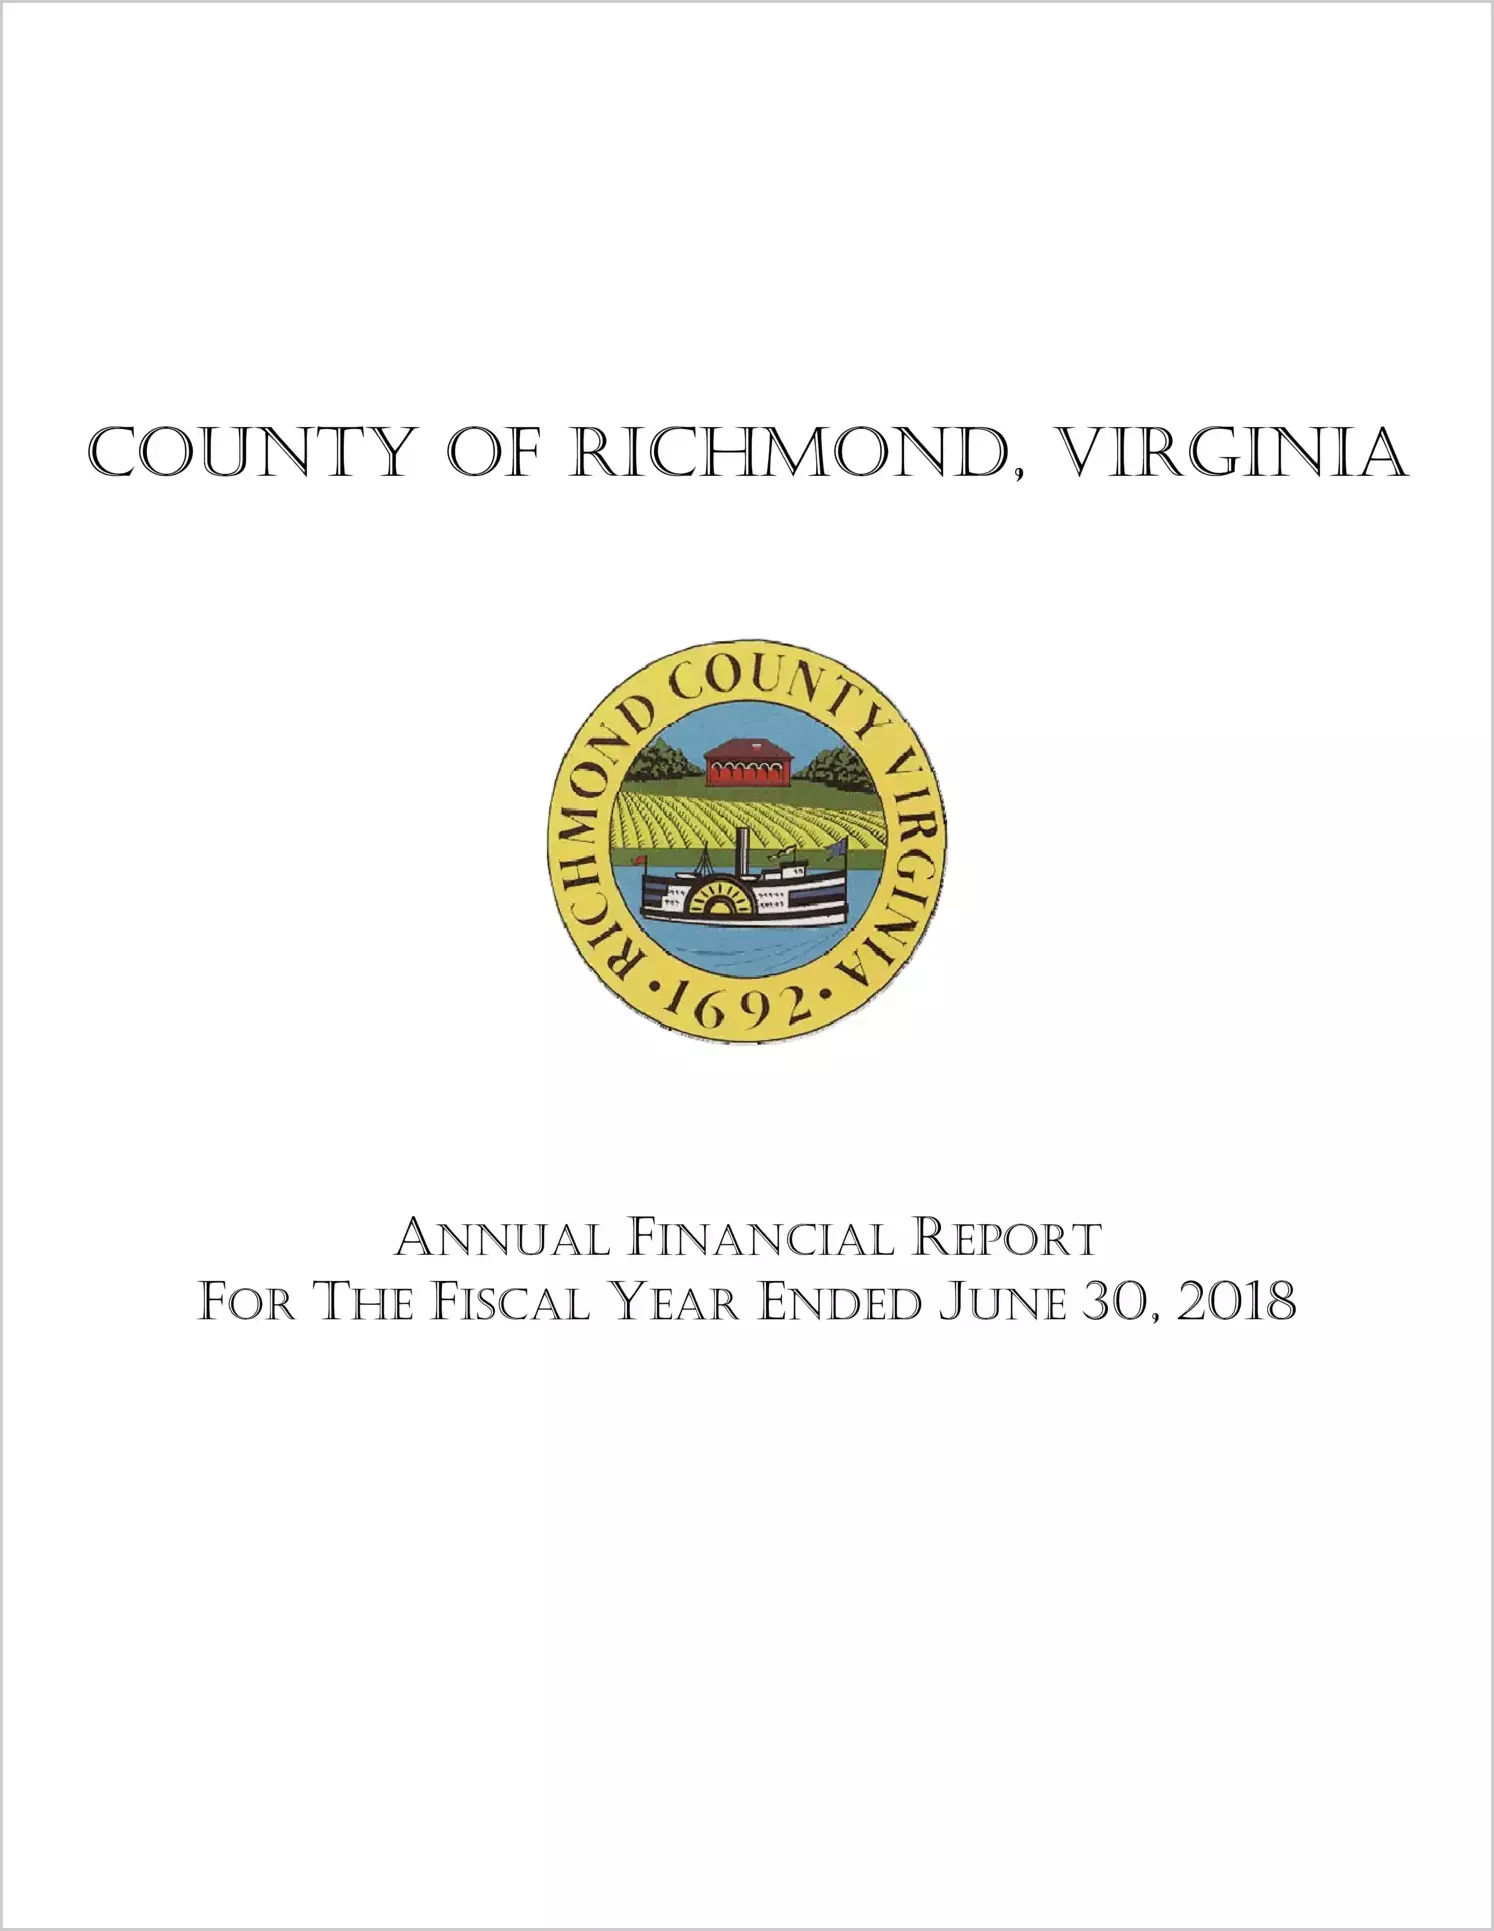 2018 Annual Financial Report for County of Richmond